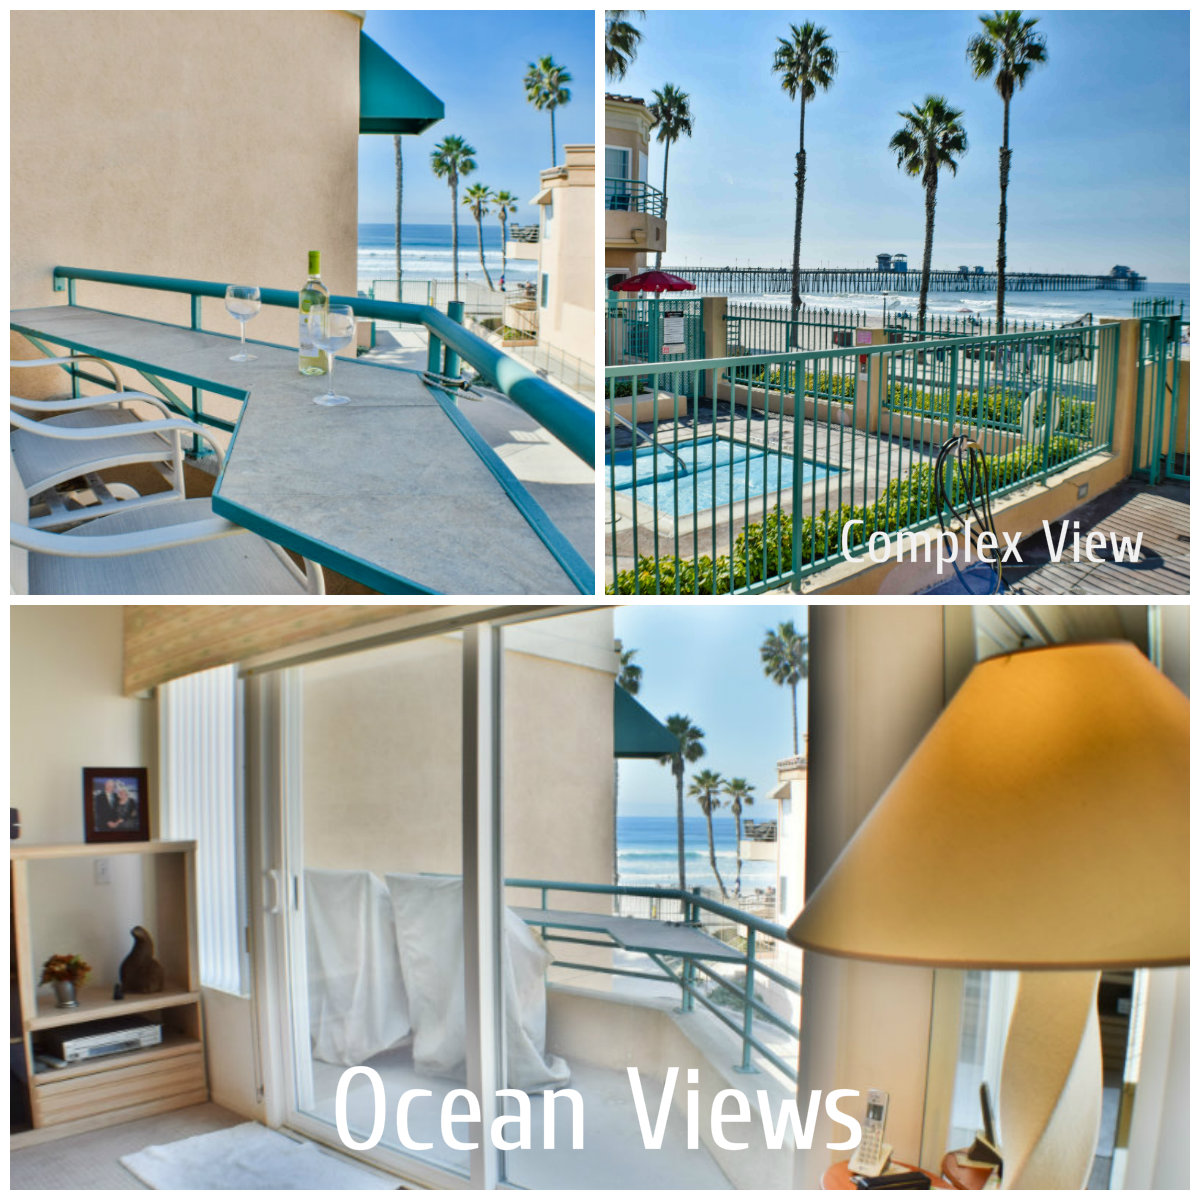 SOLD! Dreamy beach living at it’s finest ! 400 N. The Strand #2 Oceanside - Steps to the beach!